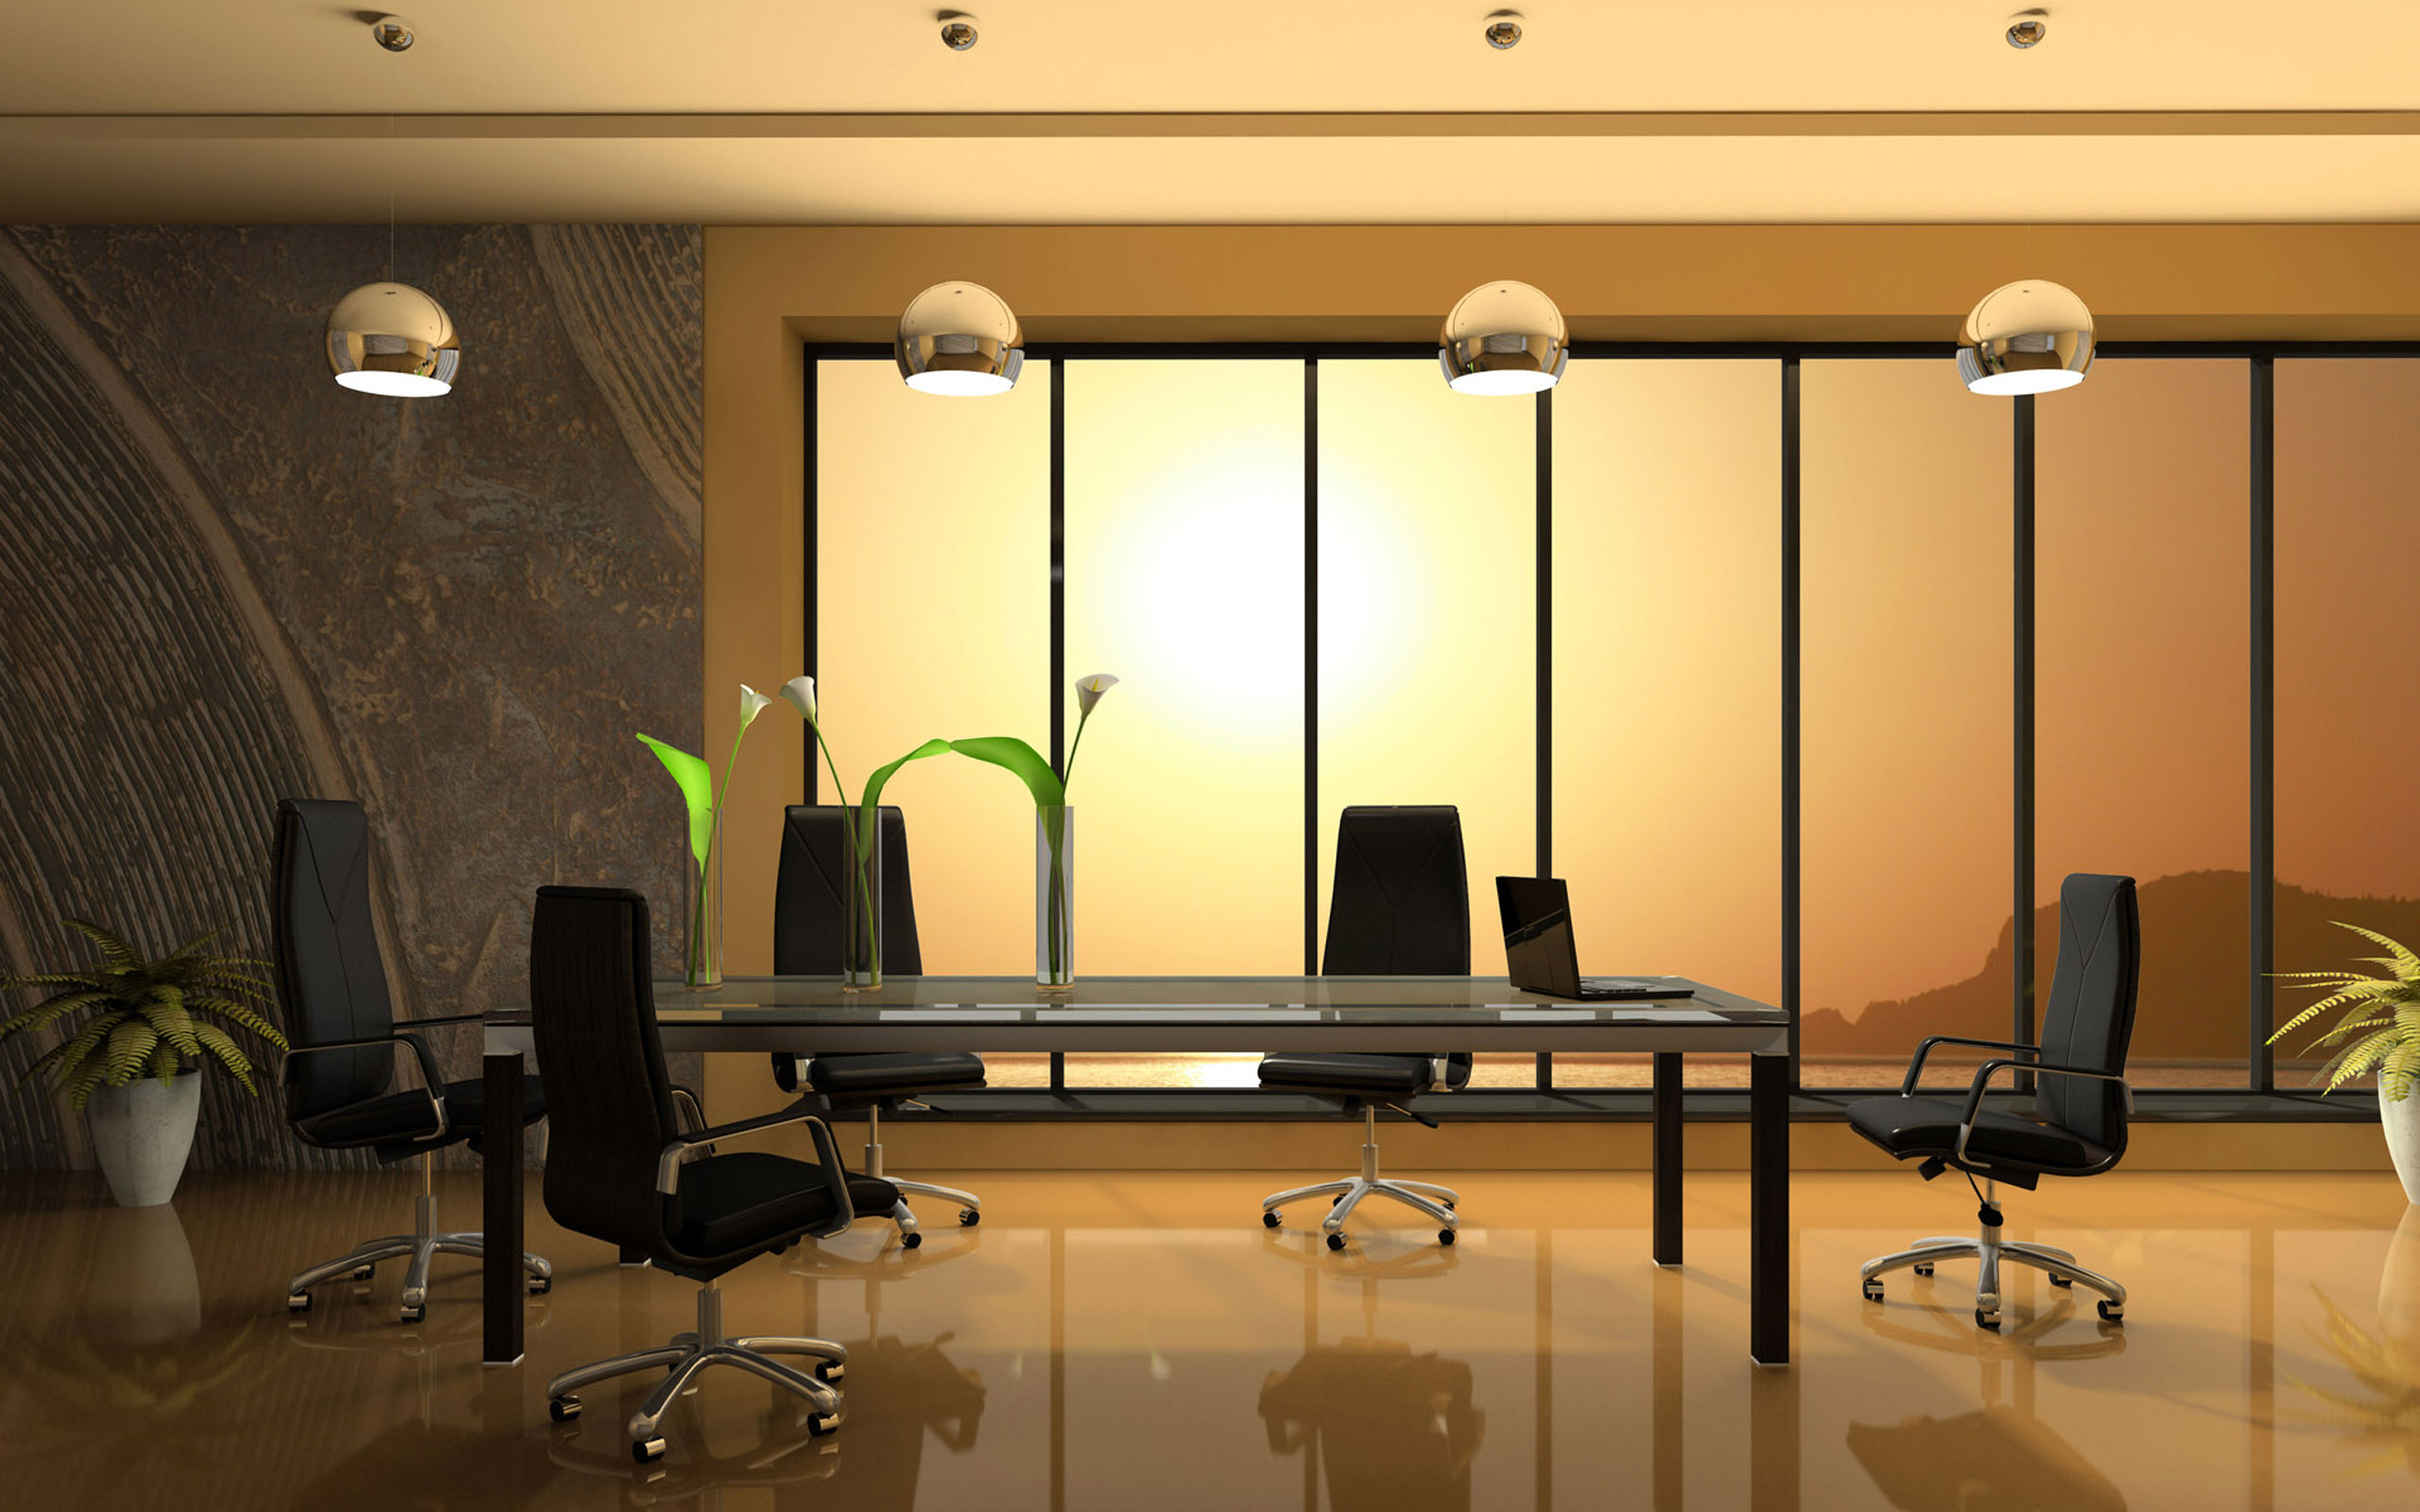    Virtual Offices   Meeting Conference Rooms Newton and Needham MA